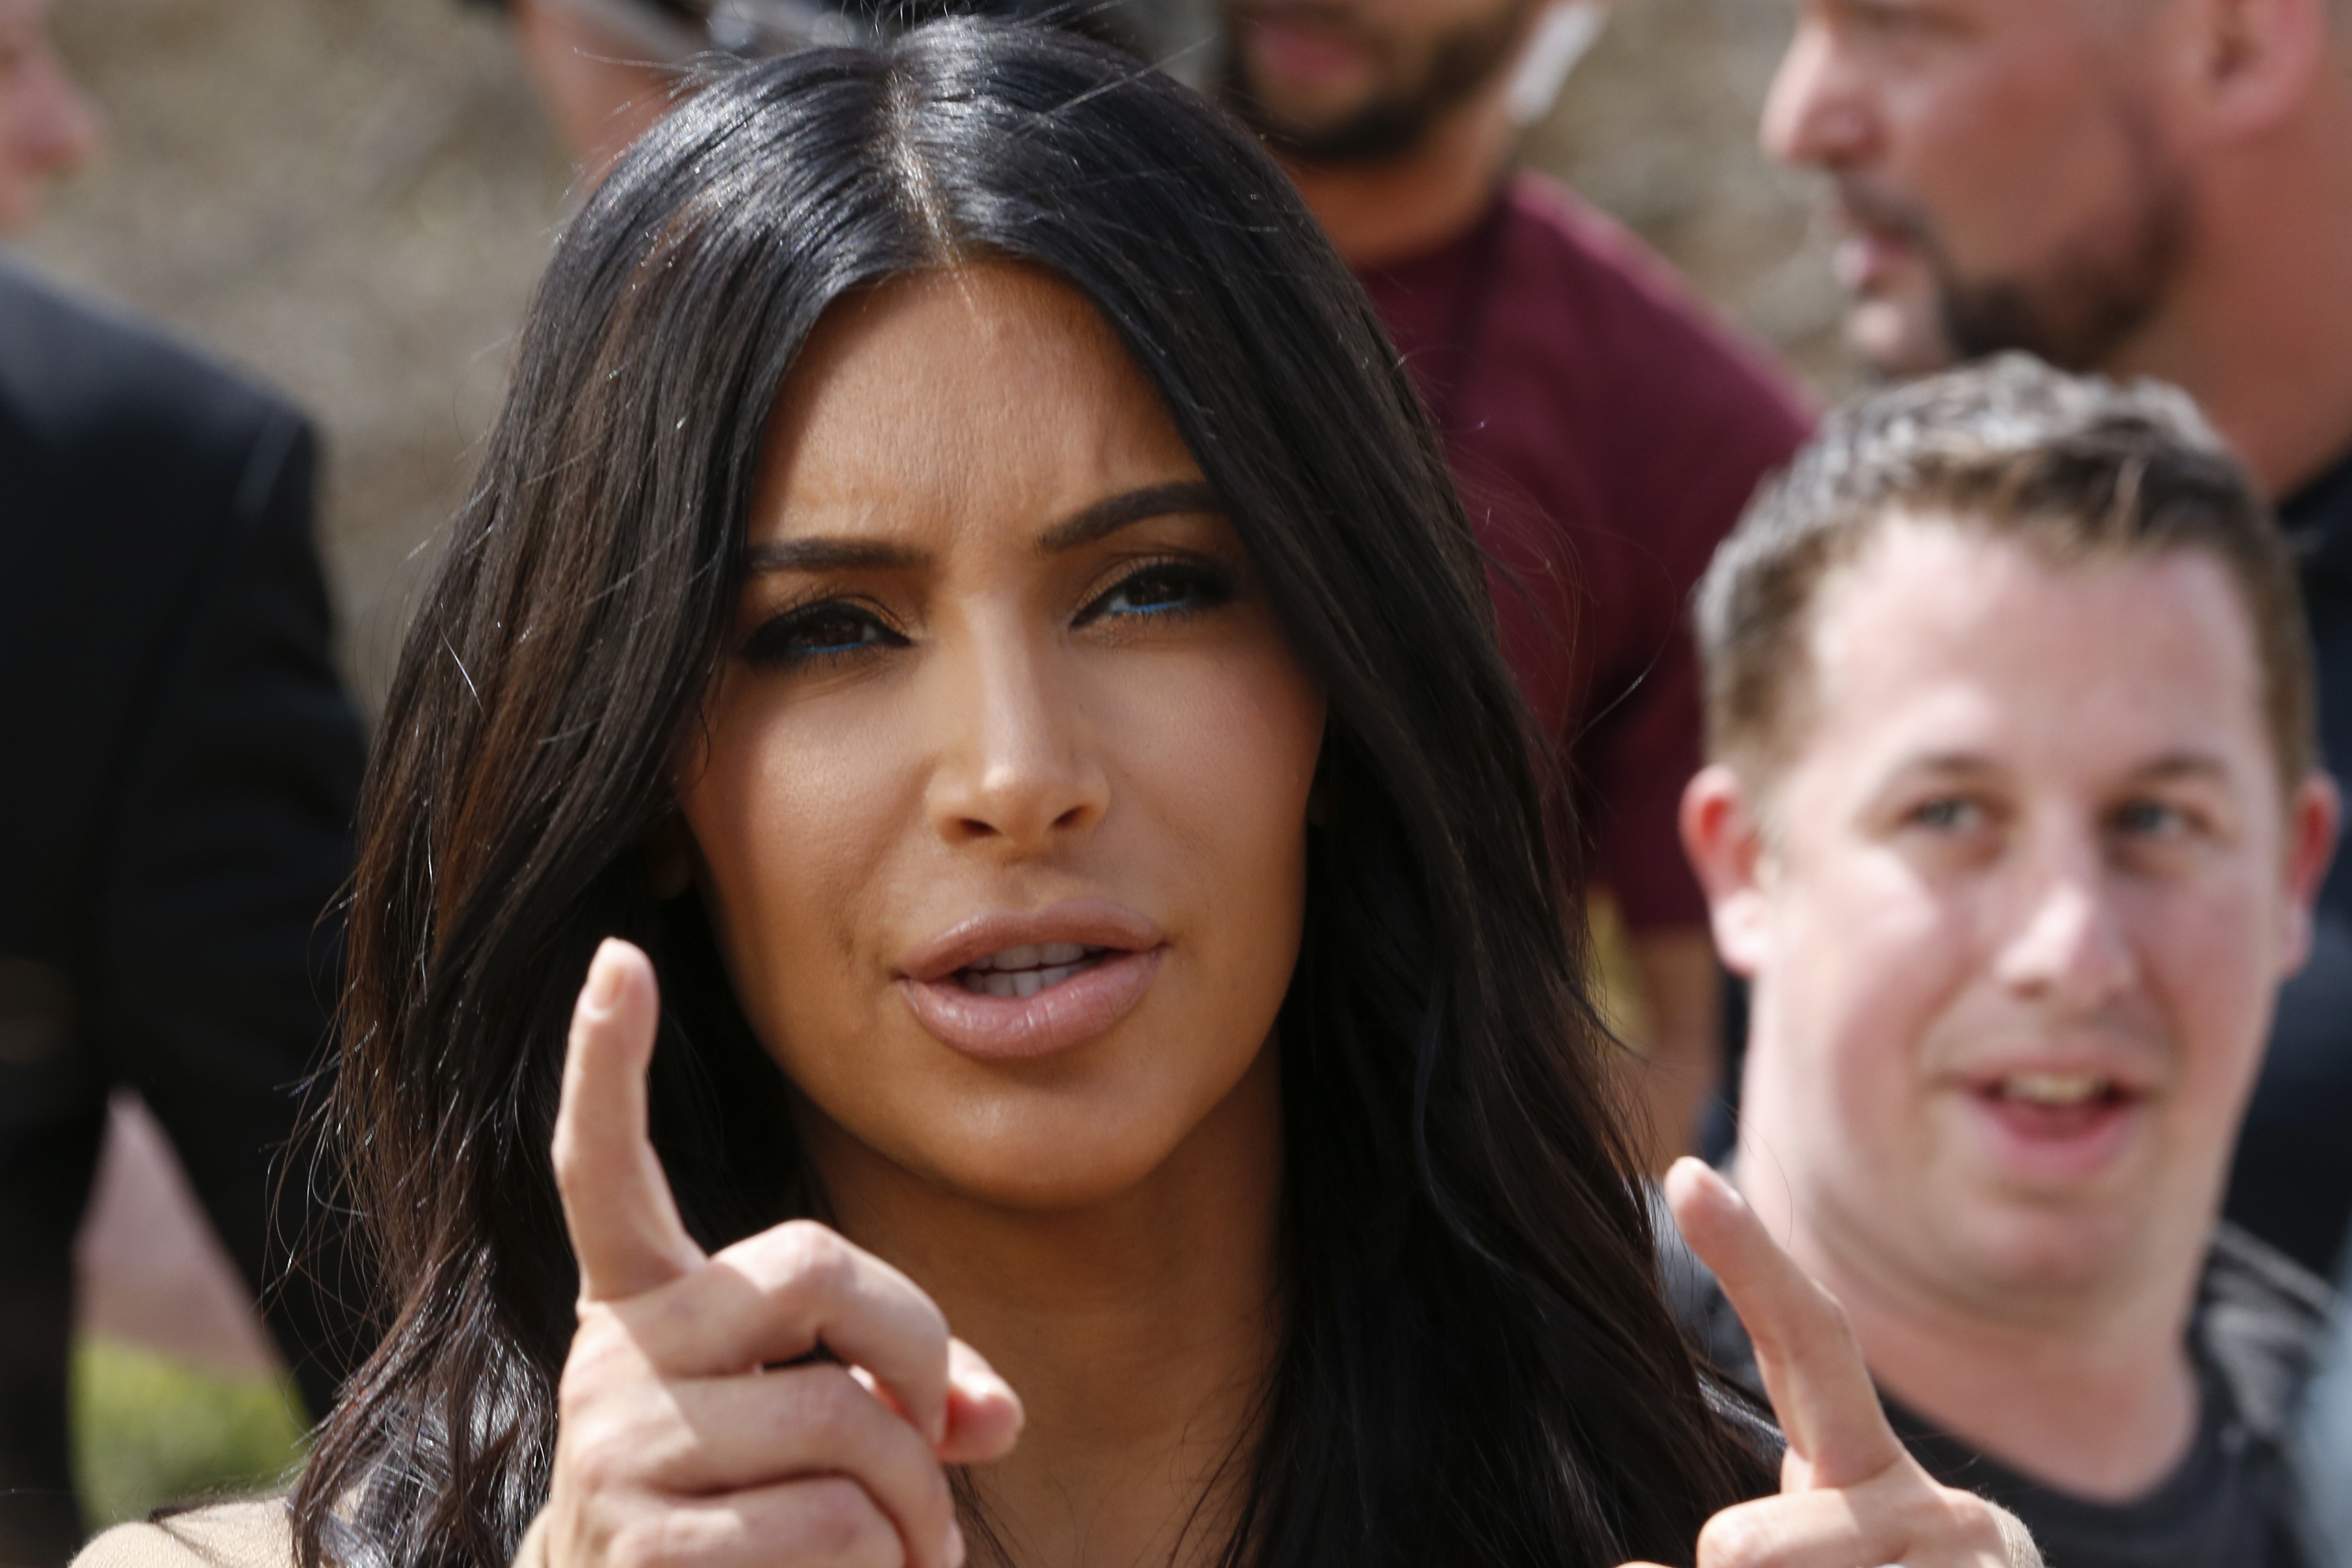 Kim Kardashian gestures while filming in Yerevan, Armenia, Thursday, April 9, 2015. The Kardashian family arrived on Wednesday in the capital of their ancestral Armenia and earlier on Thursday met with Armenian Prime Minister Hovik Abrahamyan (AP photo/Artur Harutyunyan, PAN Photo)